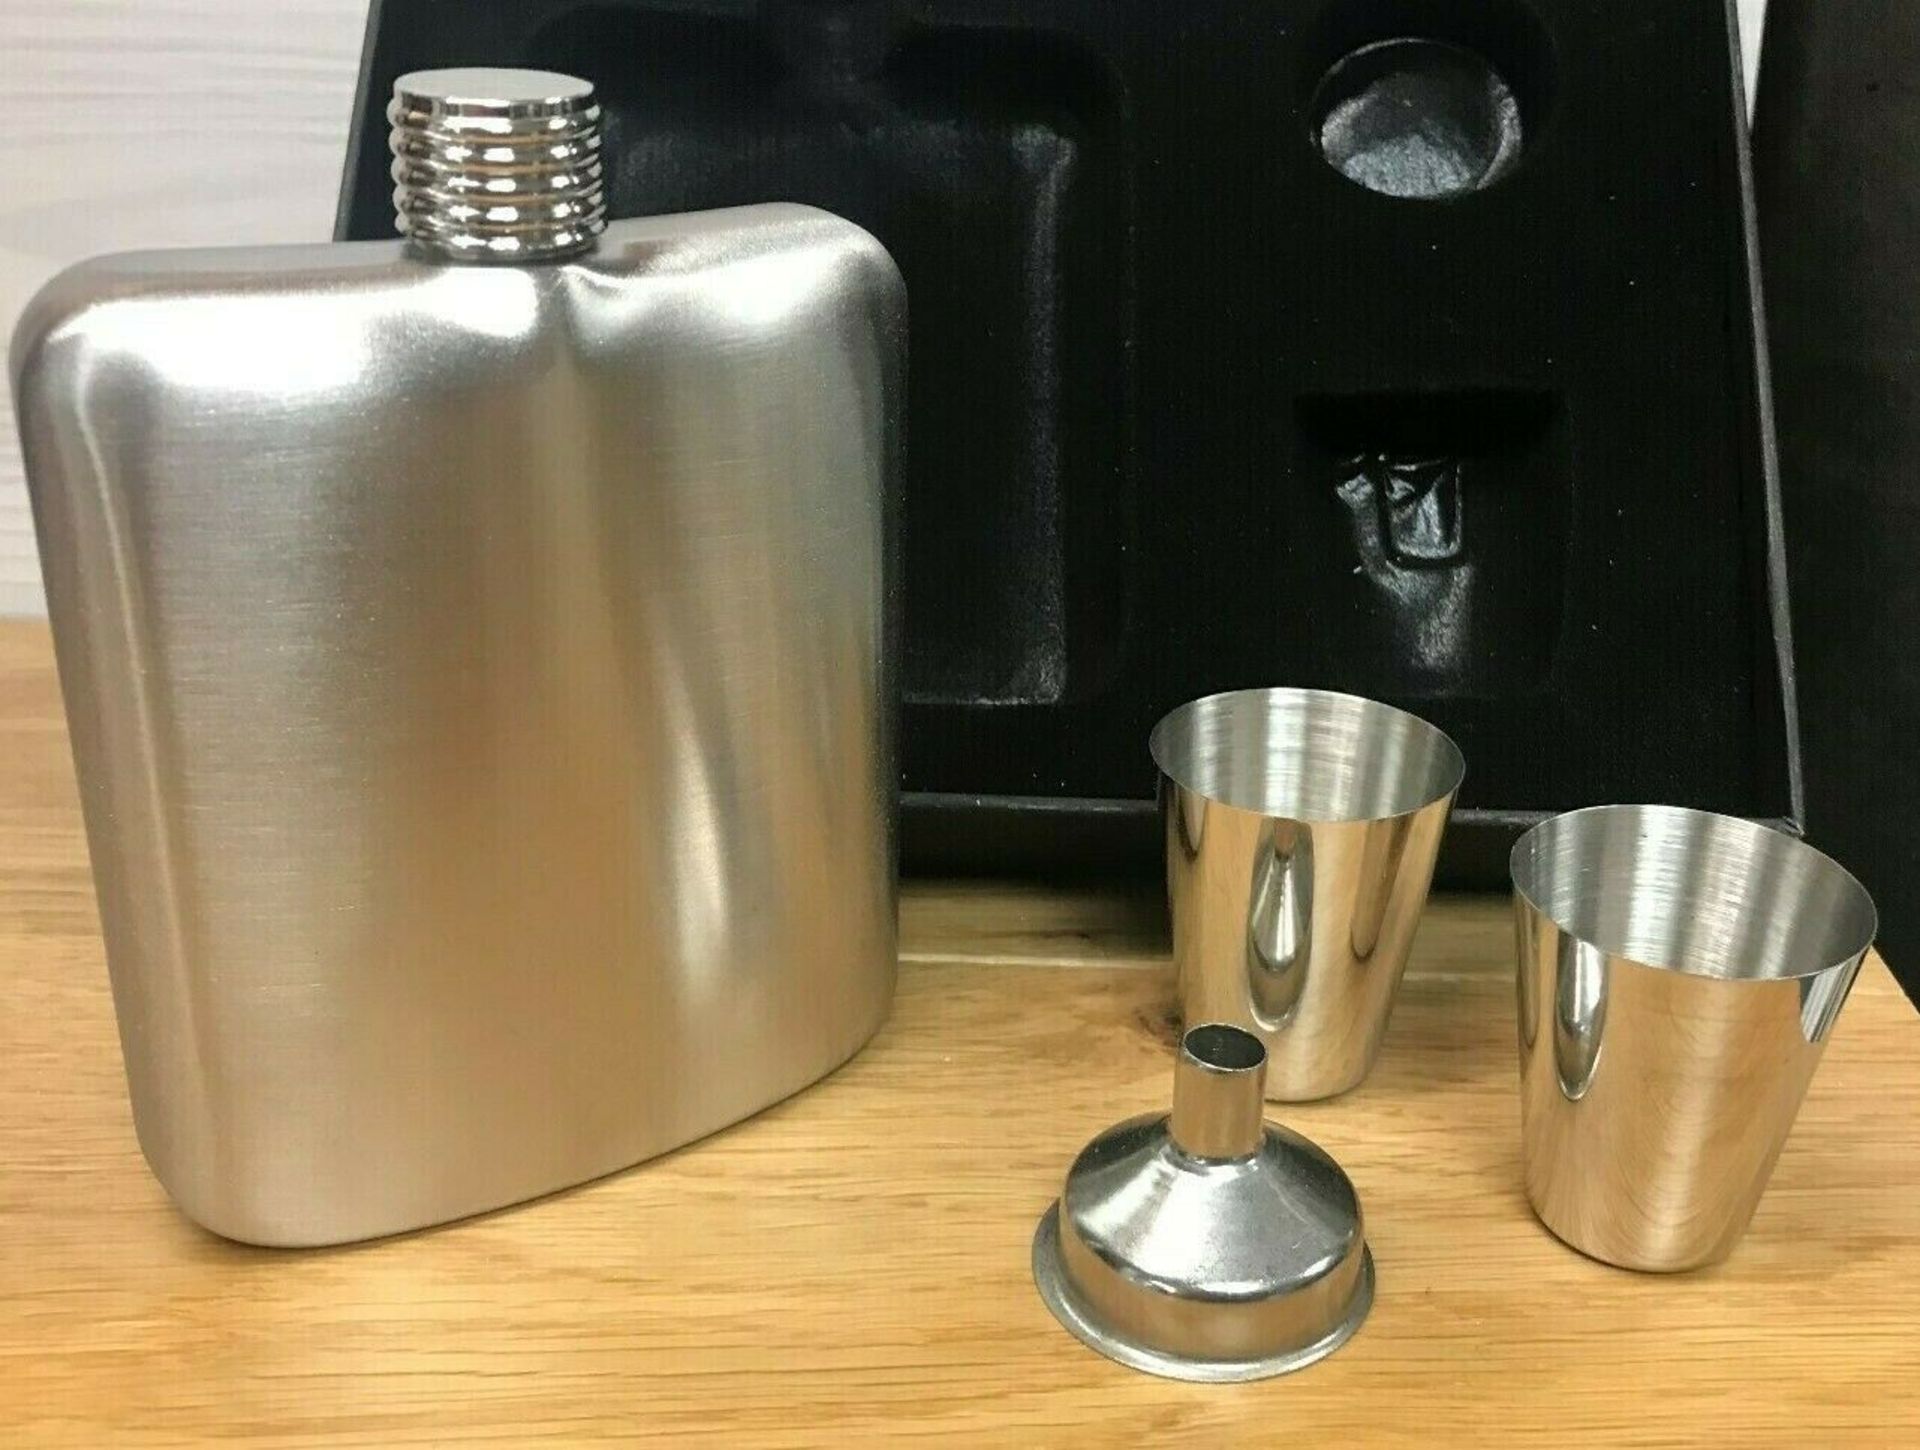 Boxed 6Oz Stainless Steel Hip Flask, Funnel / Pourer plus 2 Shot Cups - 25 Sets Total RRP £312.50 - Image 4 of 5